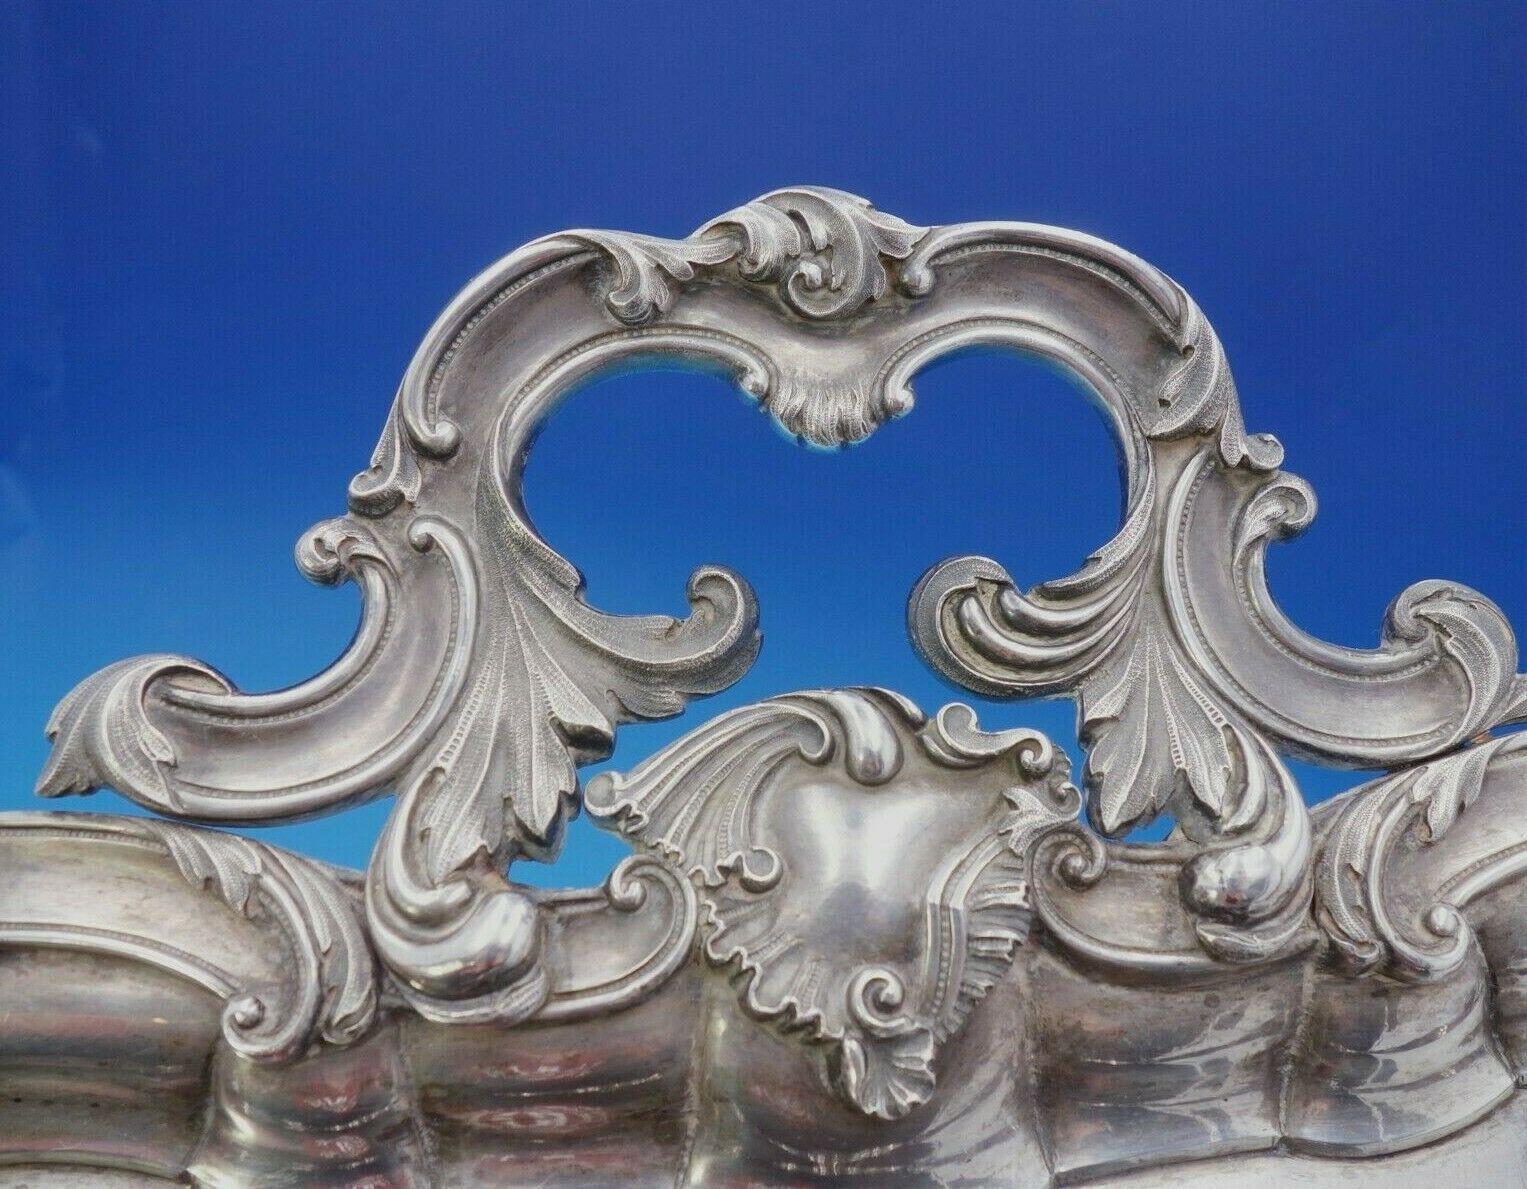 Stunning Italian .950 silver Louis XV style tea tray with ornate rococo border and applied handles (maker unknown). This piece measures 29